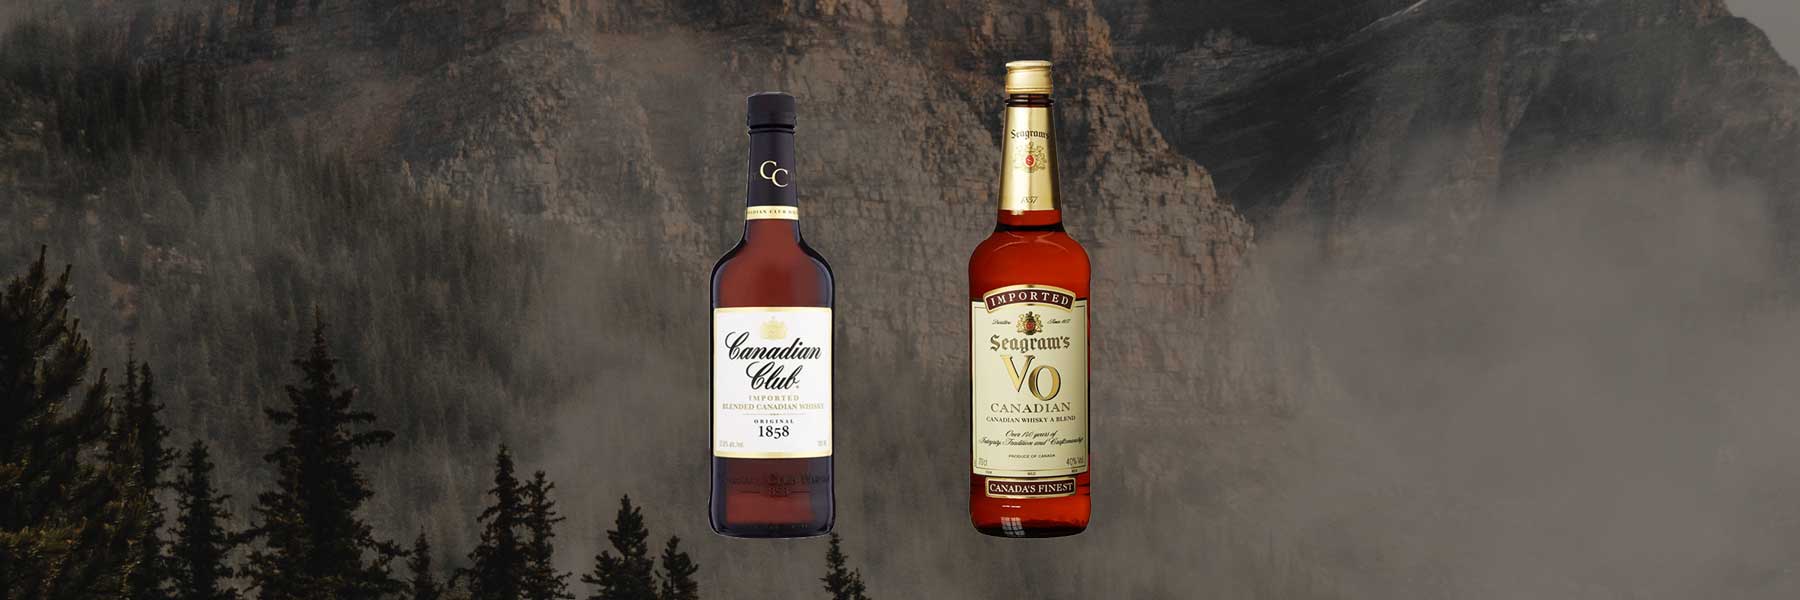 Canadian Club vs Seagram’s VO Whisky | A Comprehensive Review